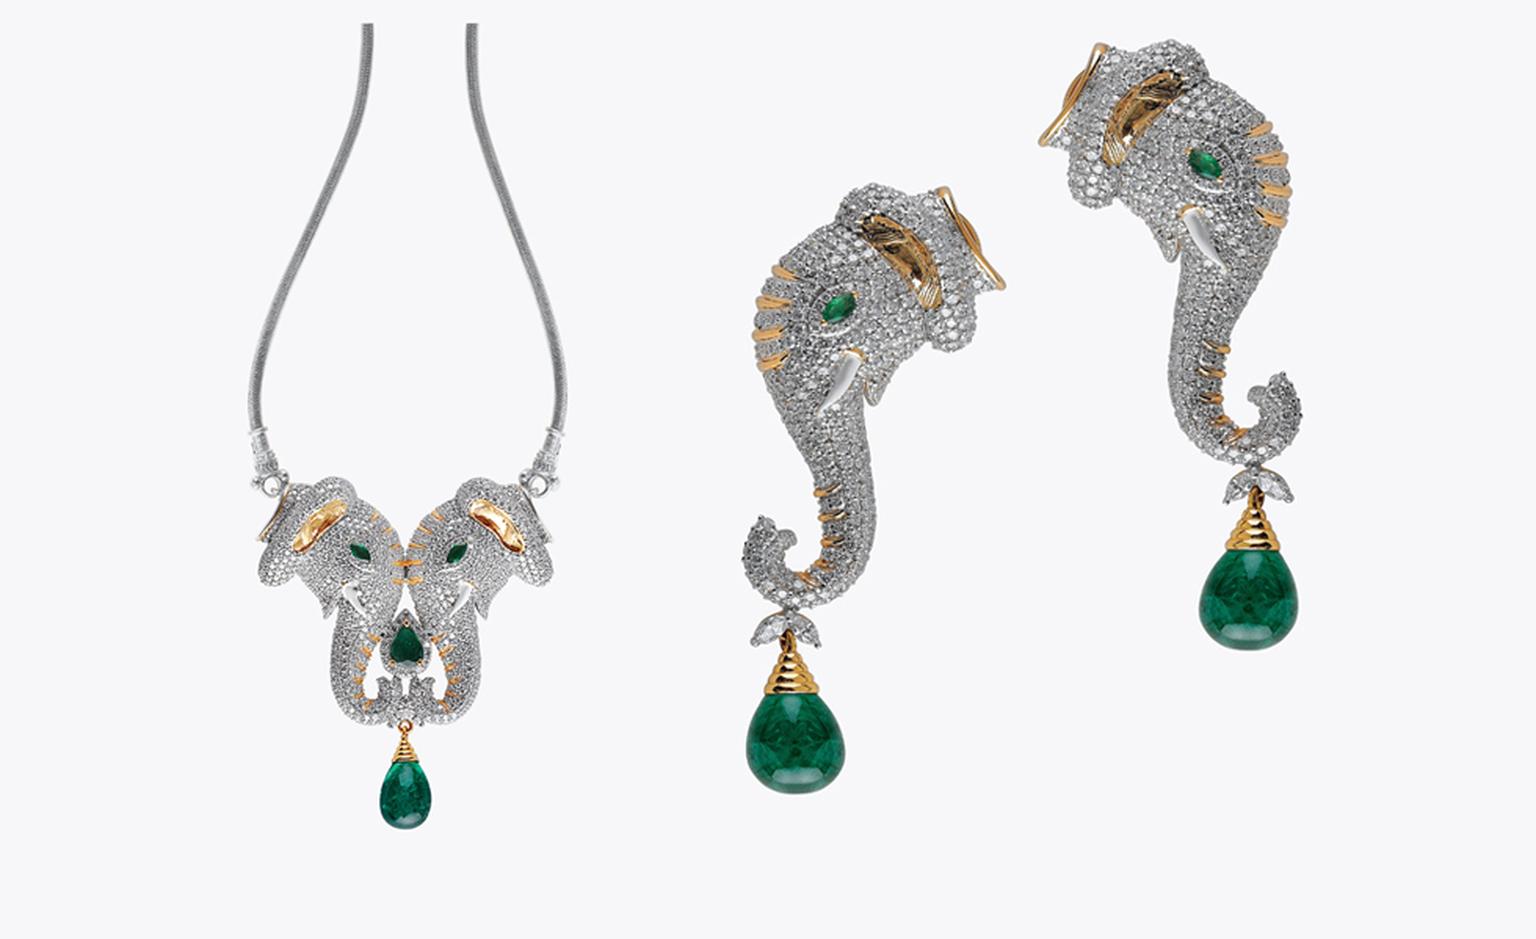 Abaran, Bangalore. Necklace and earrings, Zambian emeralds and diamonds in yellow  gold. Sold as a set, price from $65,000.